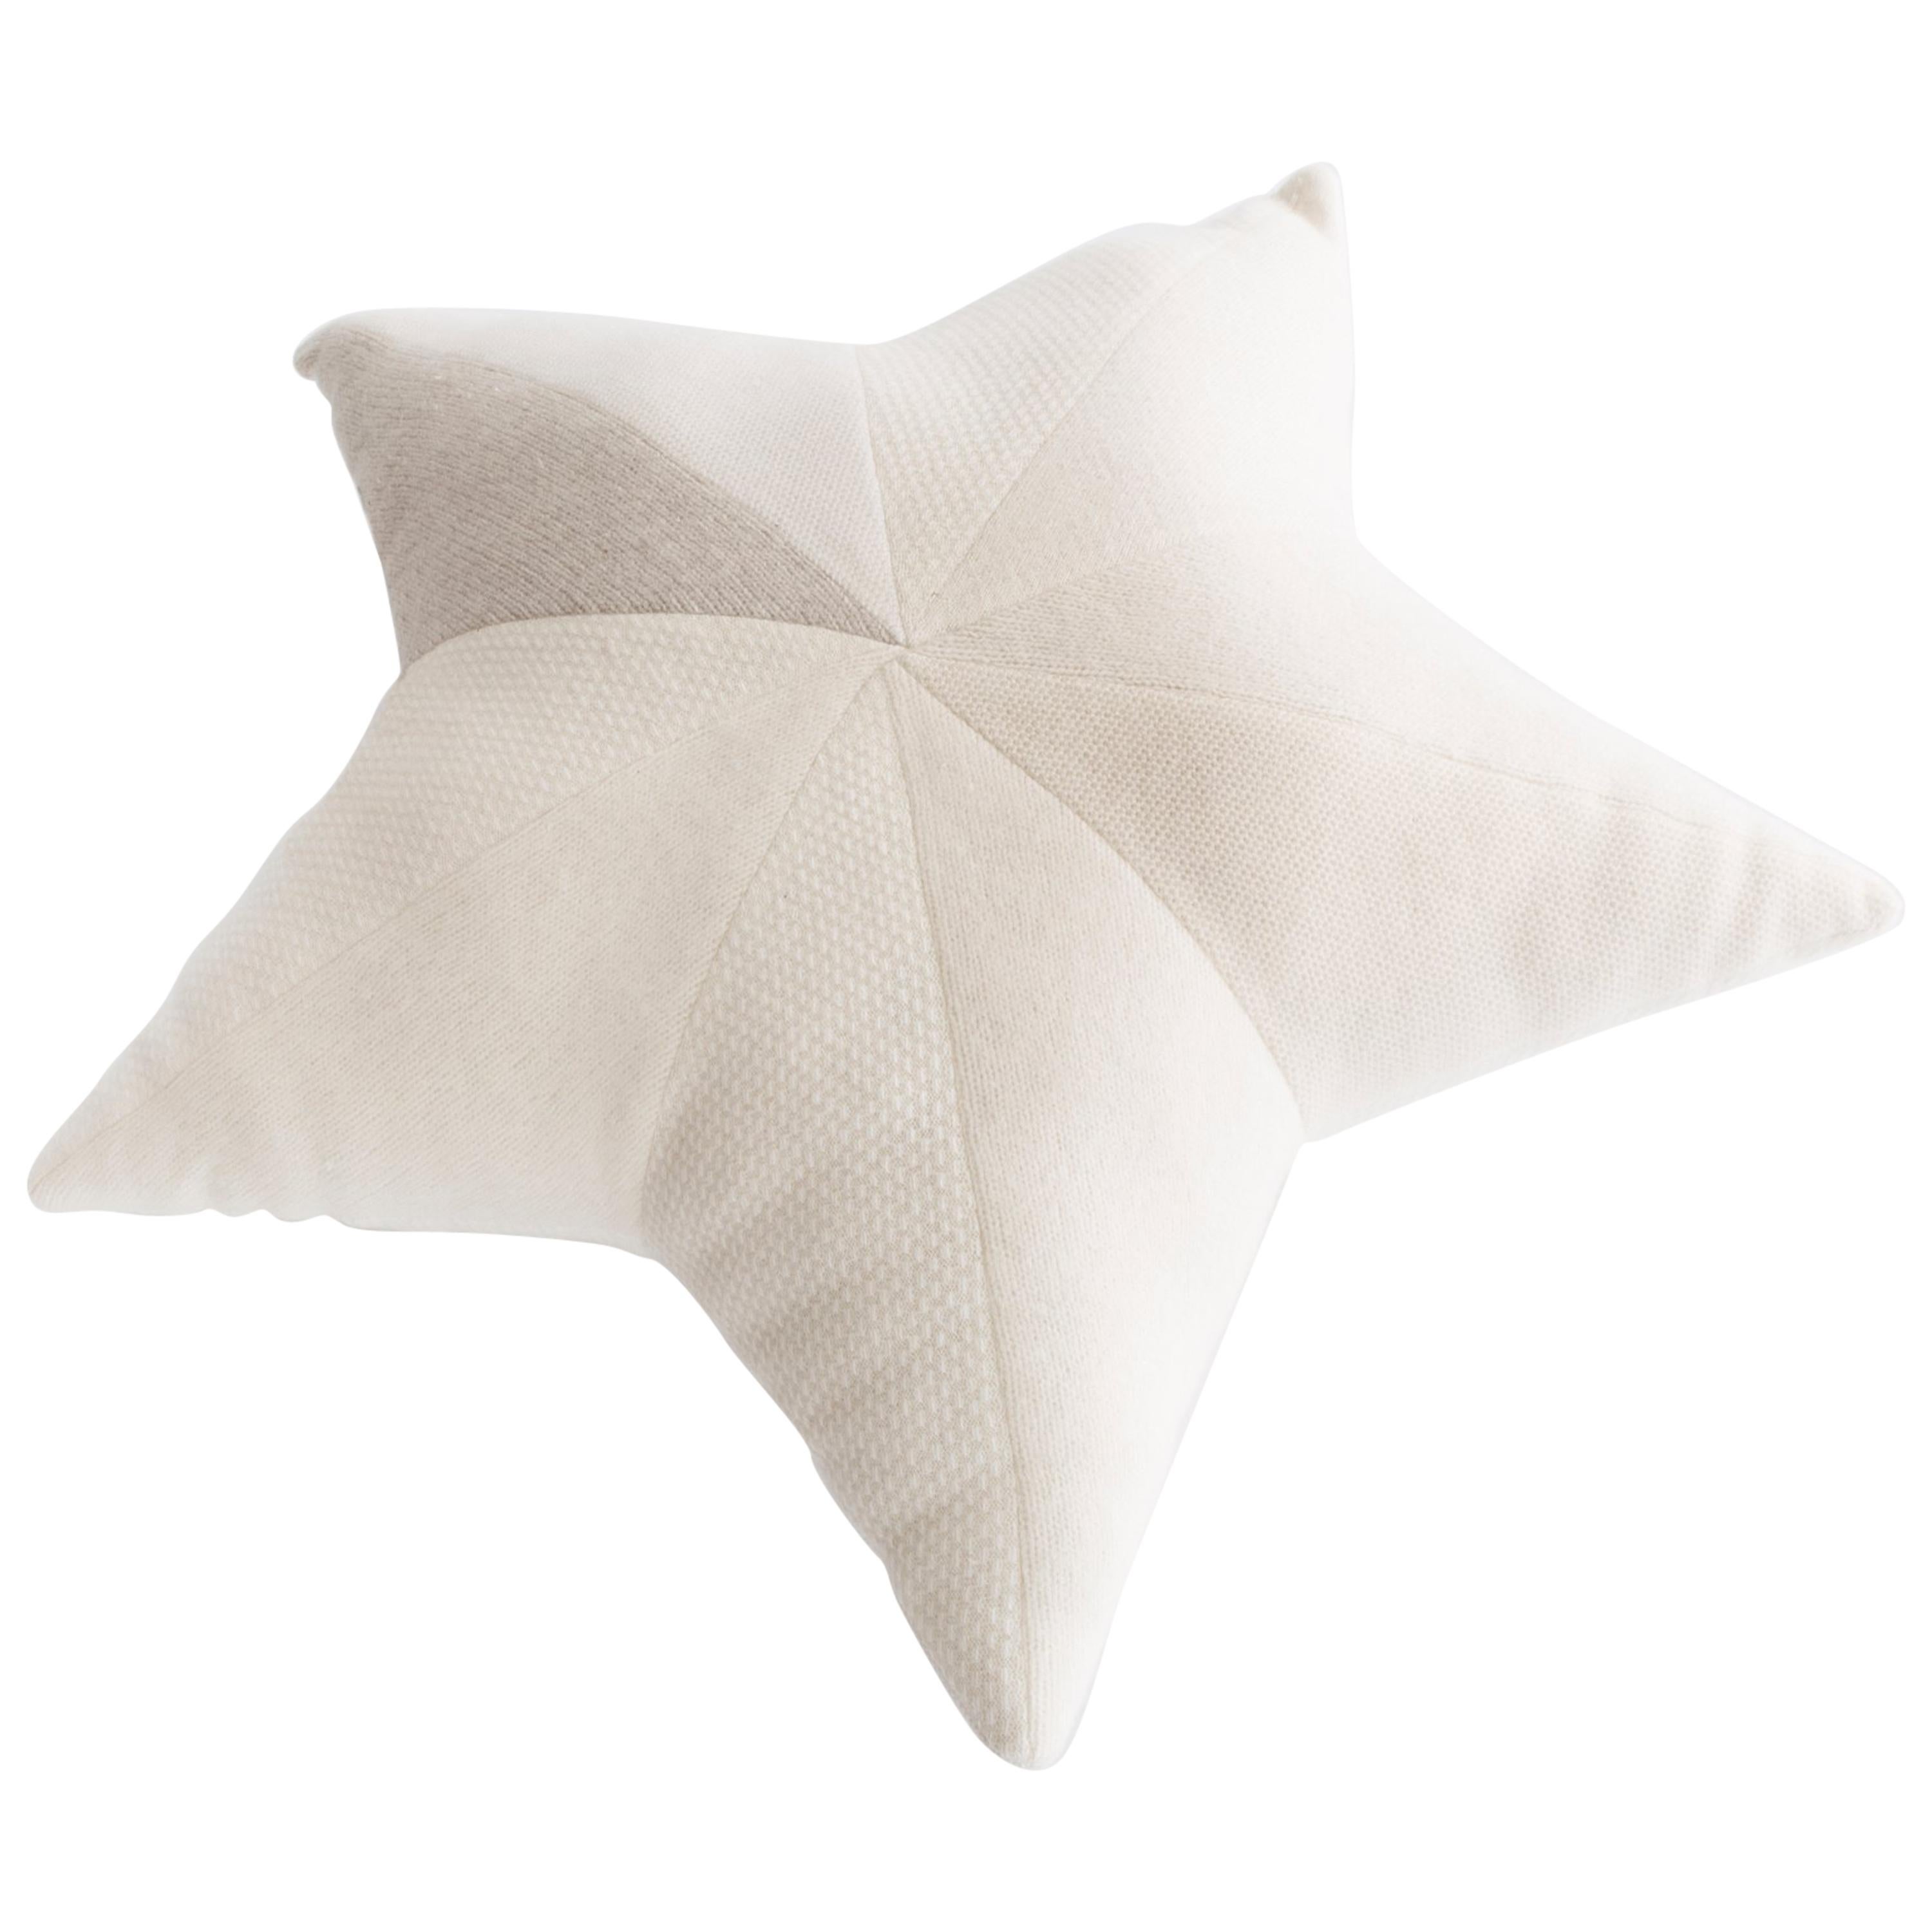 Star-Shaped Patchwordk Pillow in White Cashmere by Greg Chait, 2017